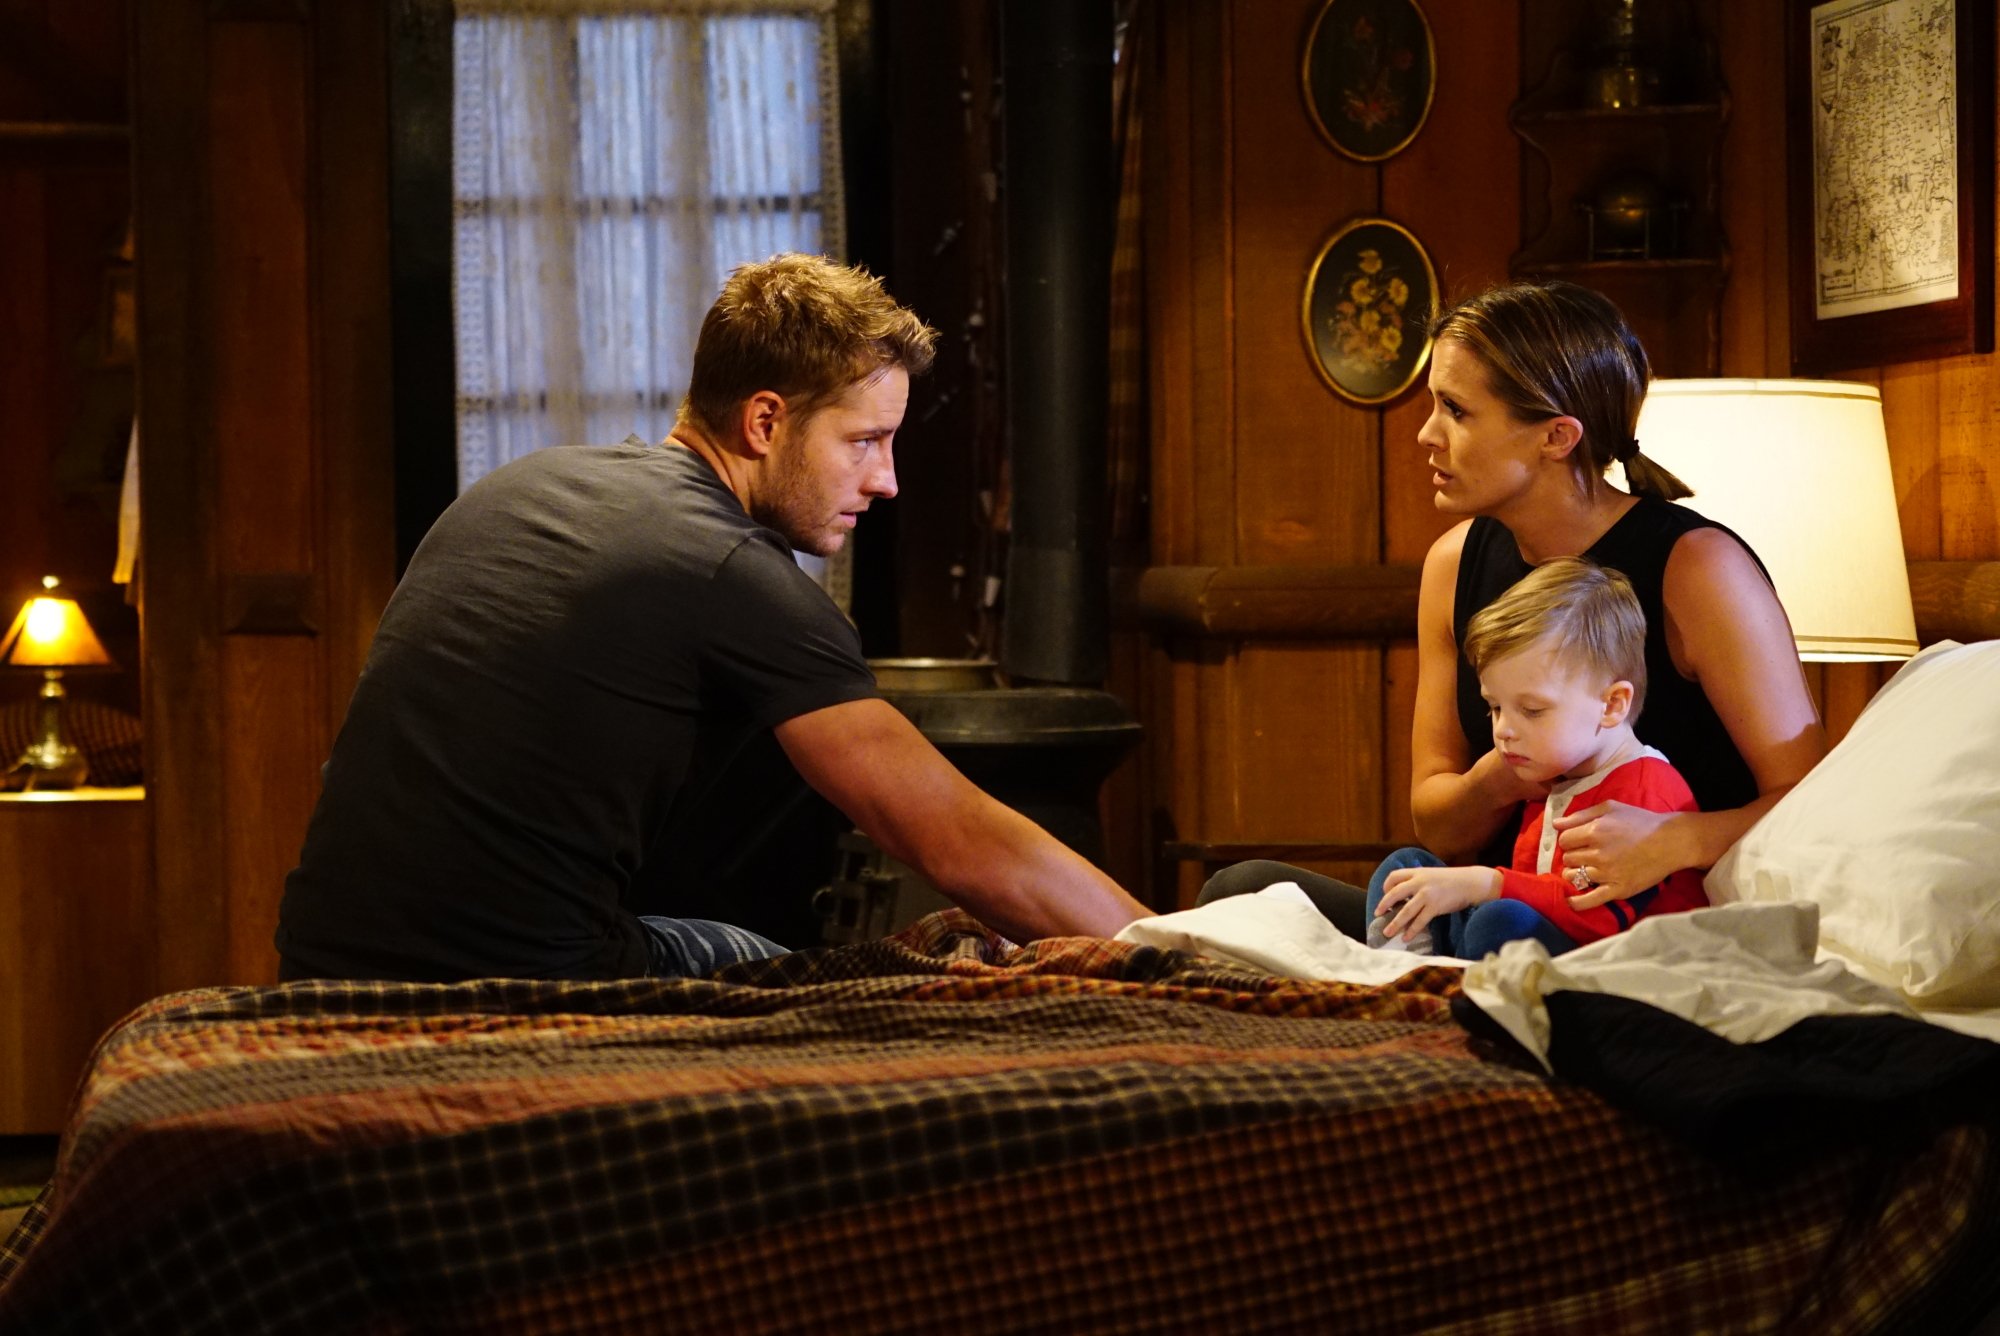 Melissa Claire Egan (Chelsea Newman) and Justin Hartley (Adam Newman) sitting on a bed with a baby